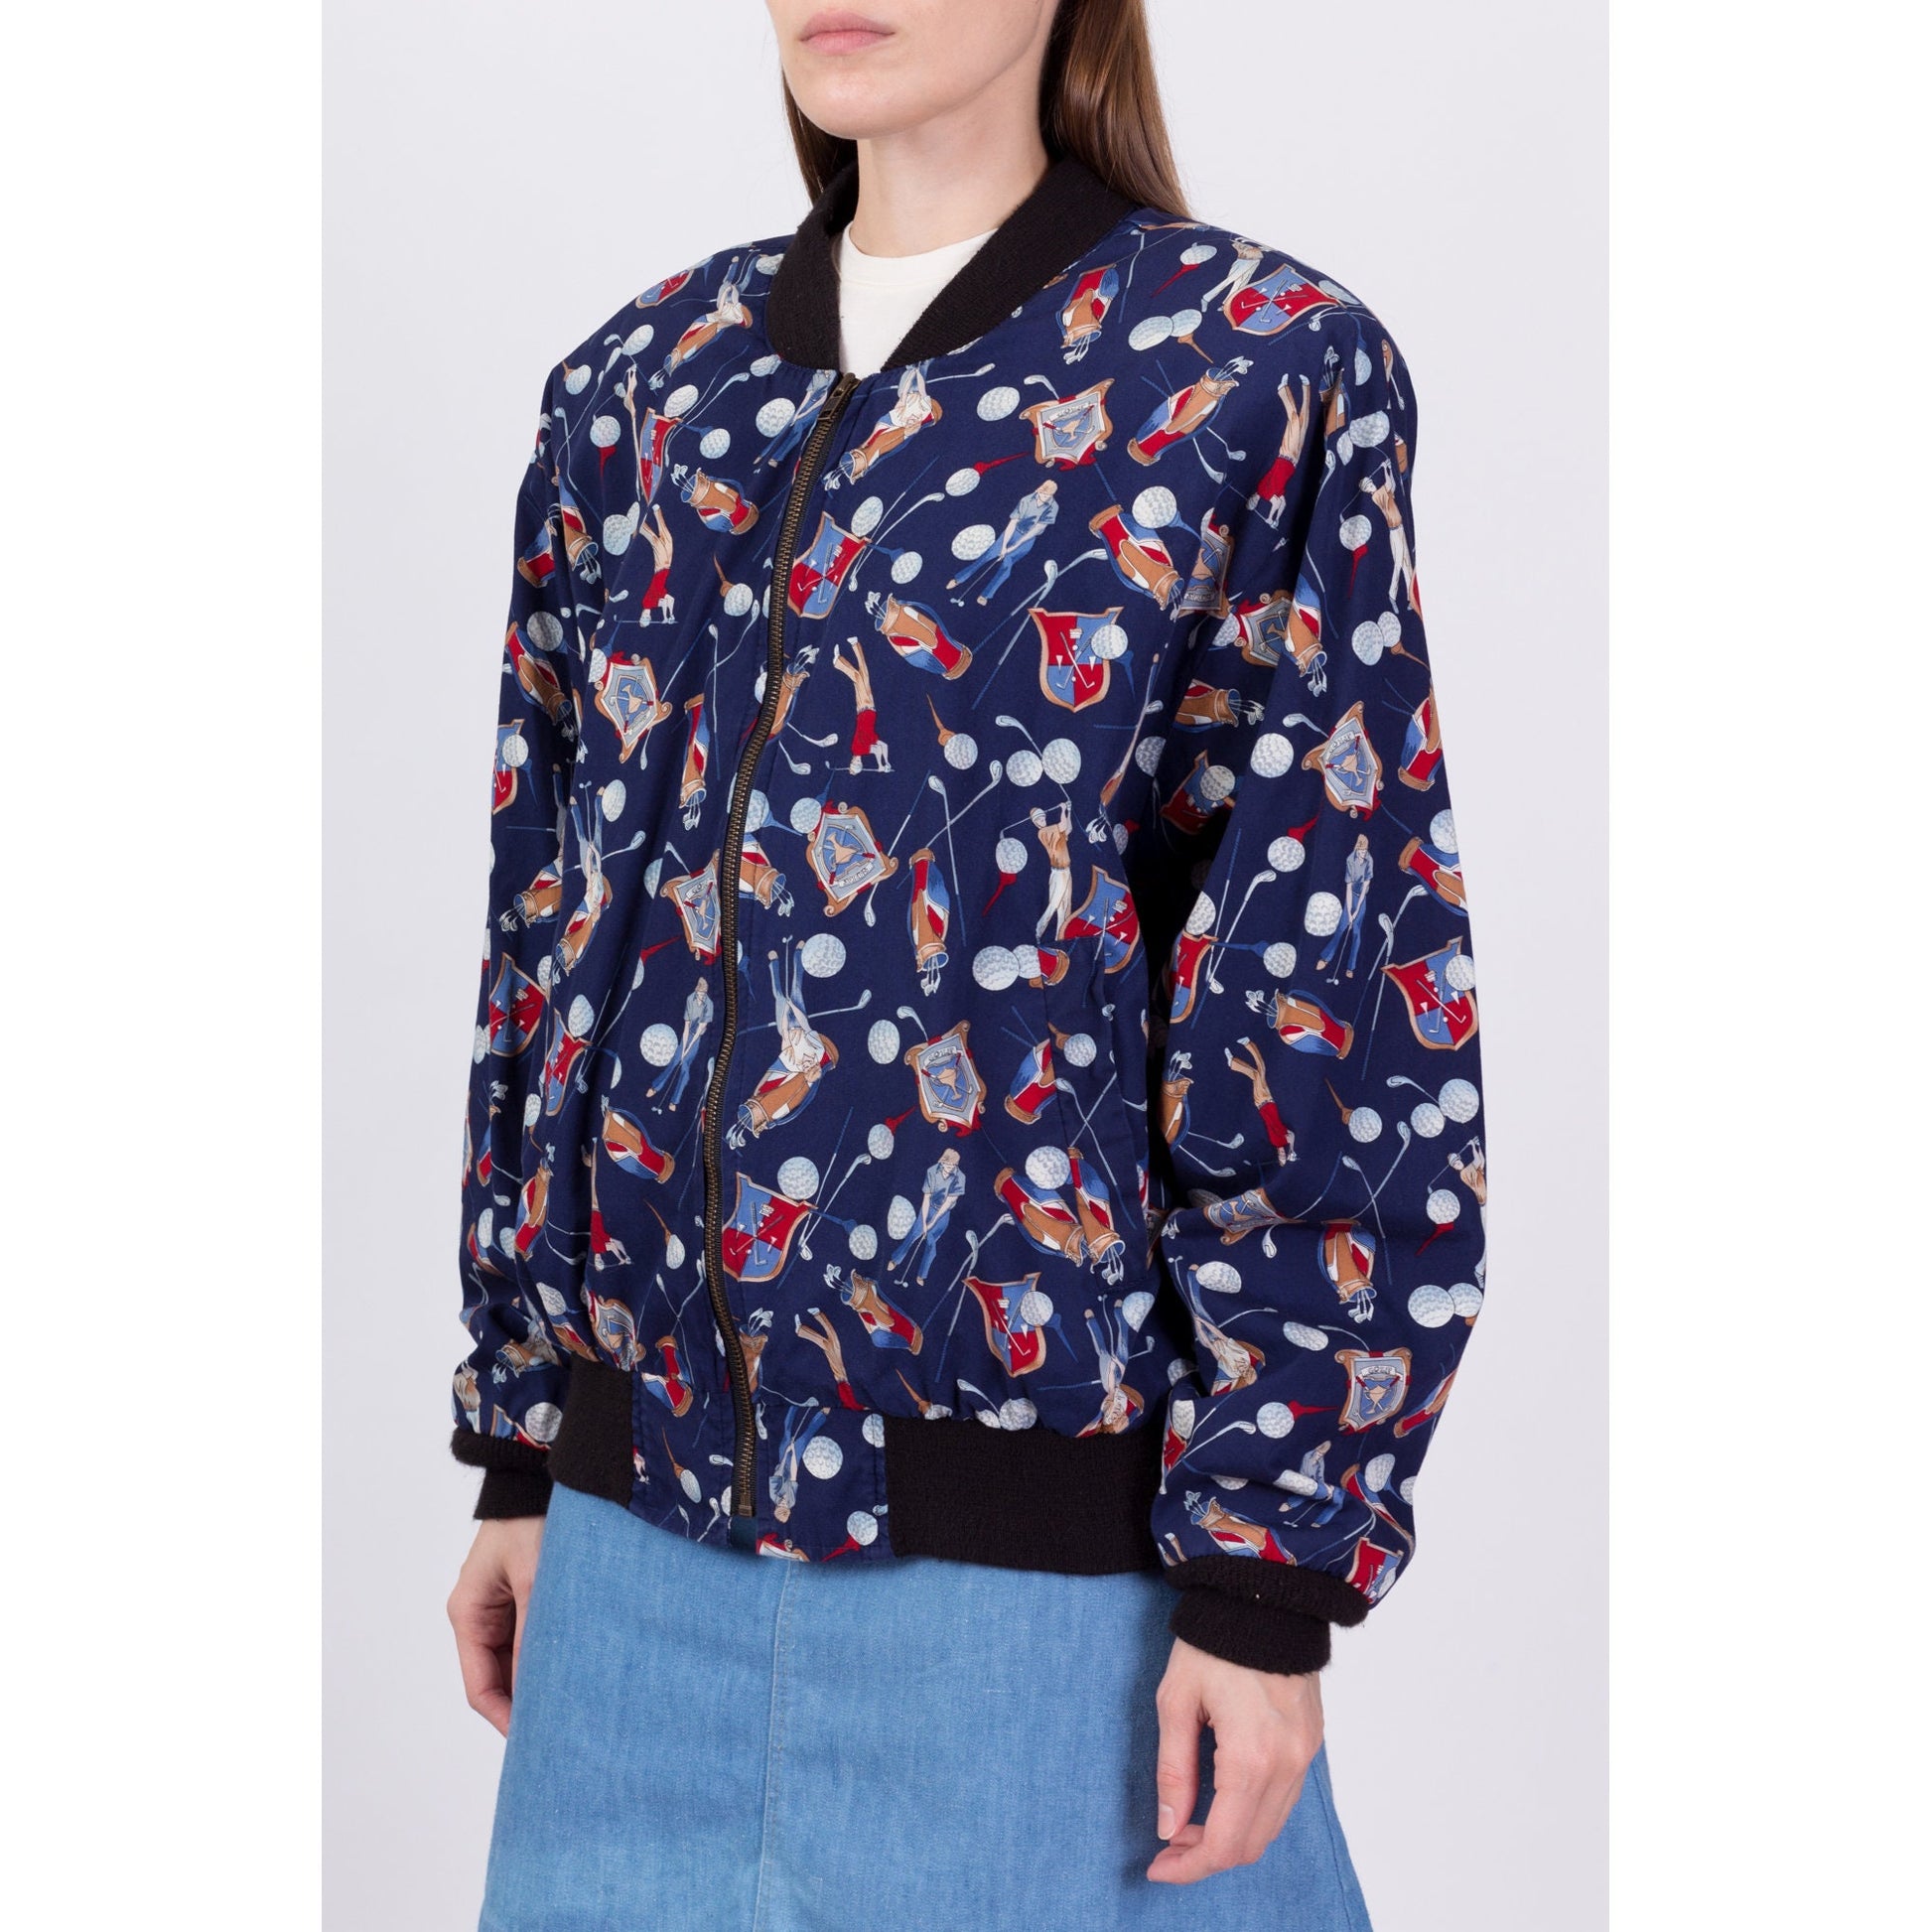 80s Golf All Over Print Jacket - One Size 